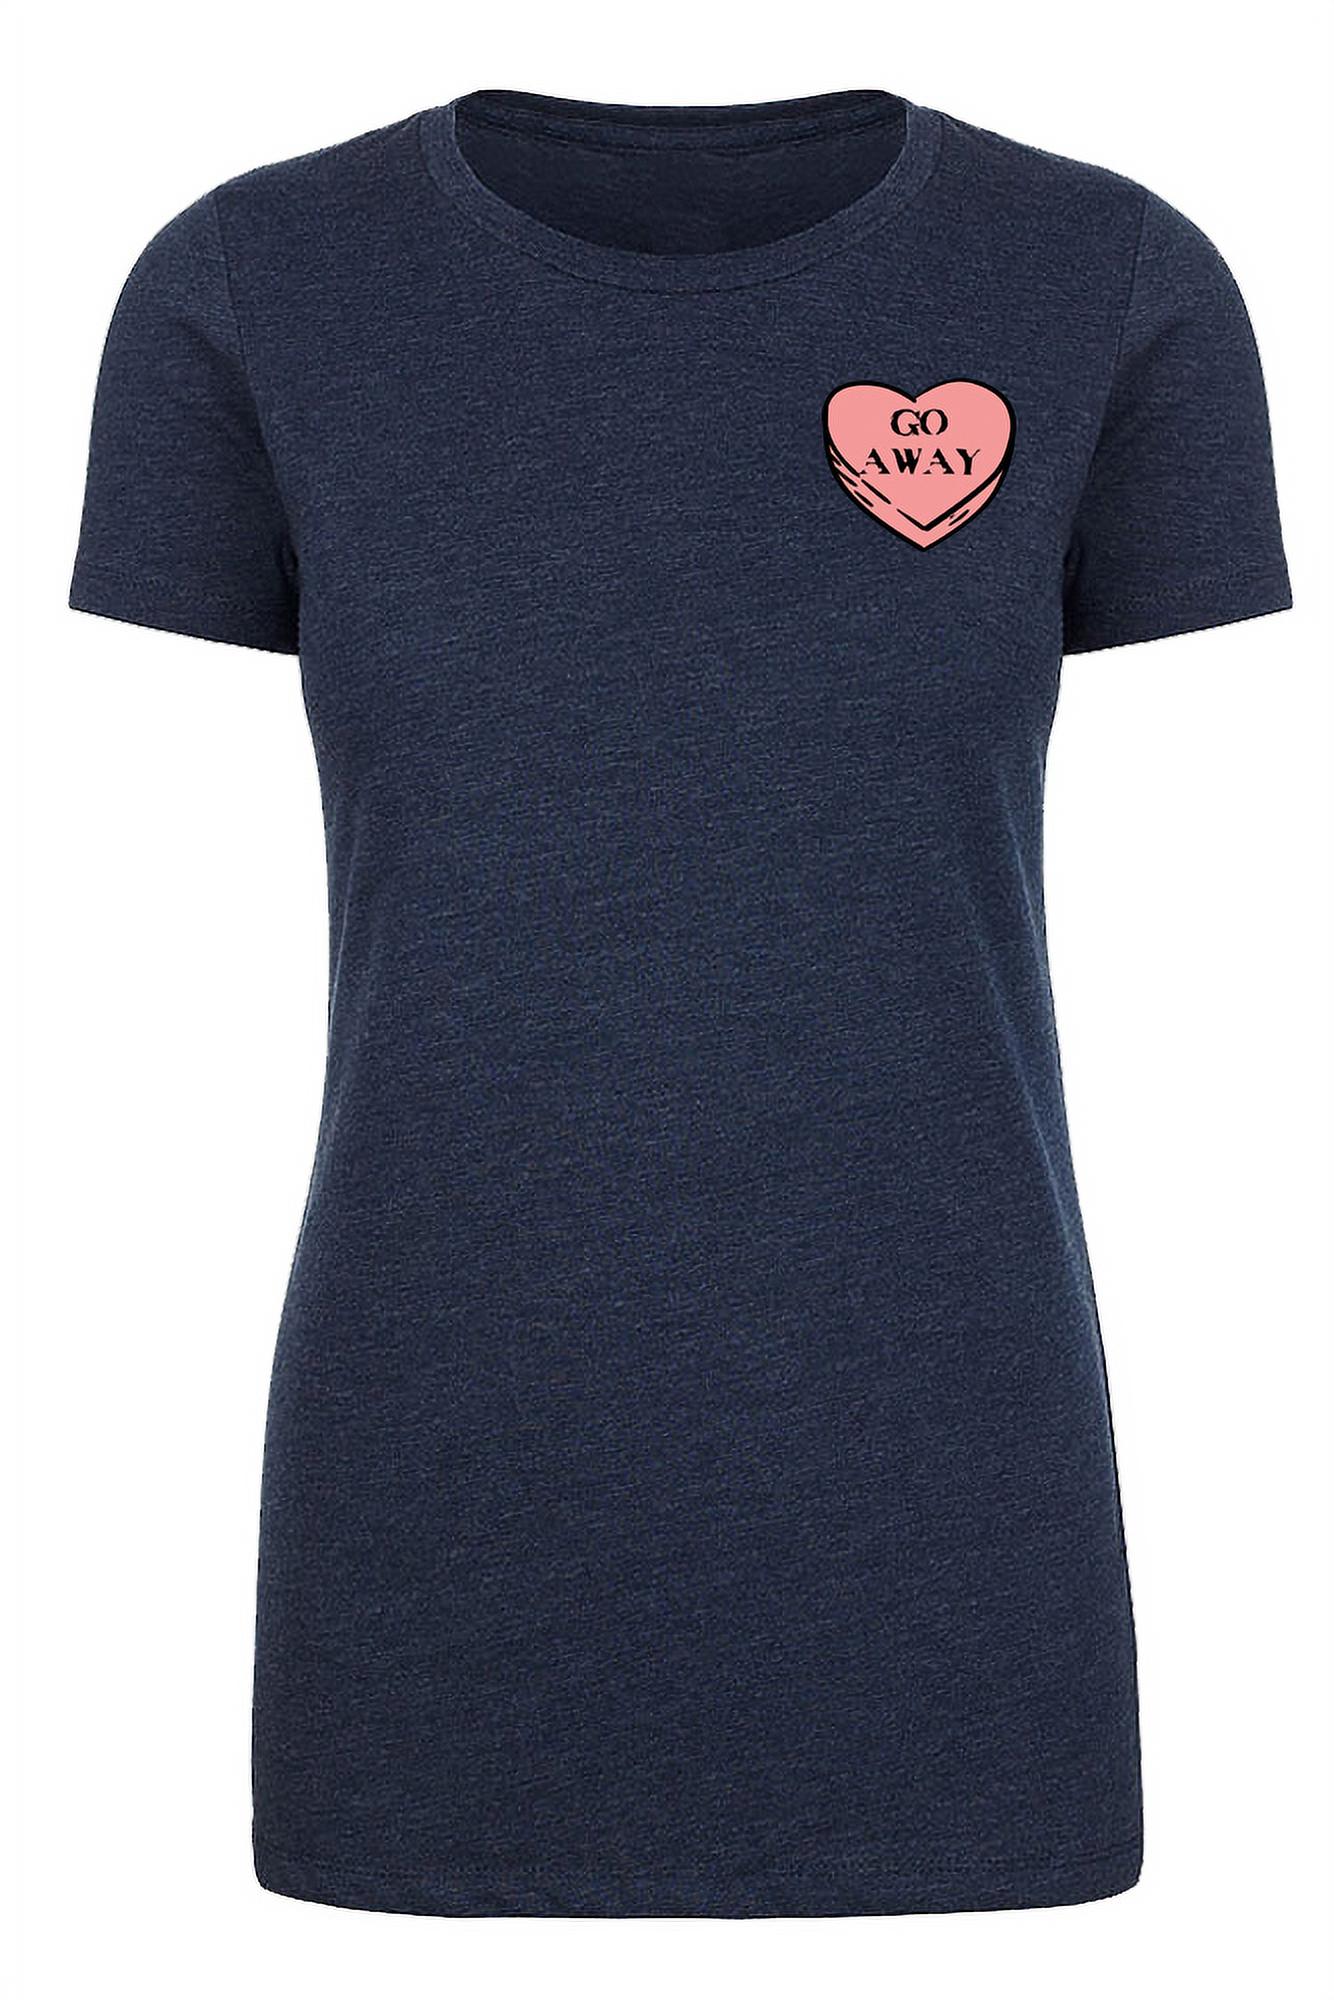 I Hate Valentine's Day shirts, Woman Crew Neck T-Shirts, Candy Heart T-shirts - Go Away - image 1 of 1